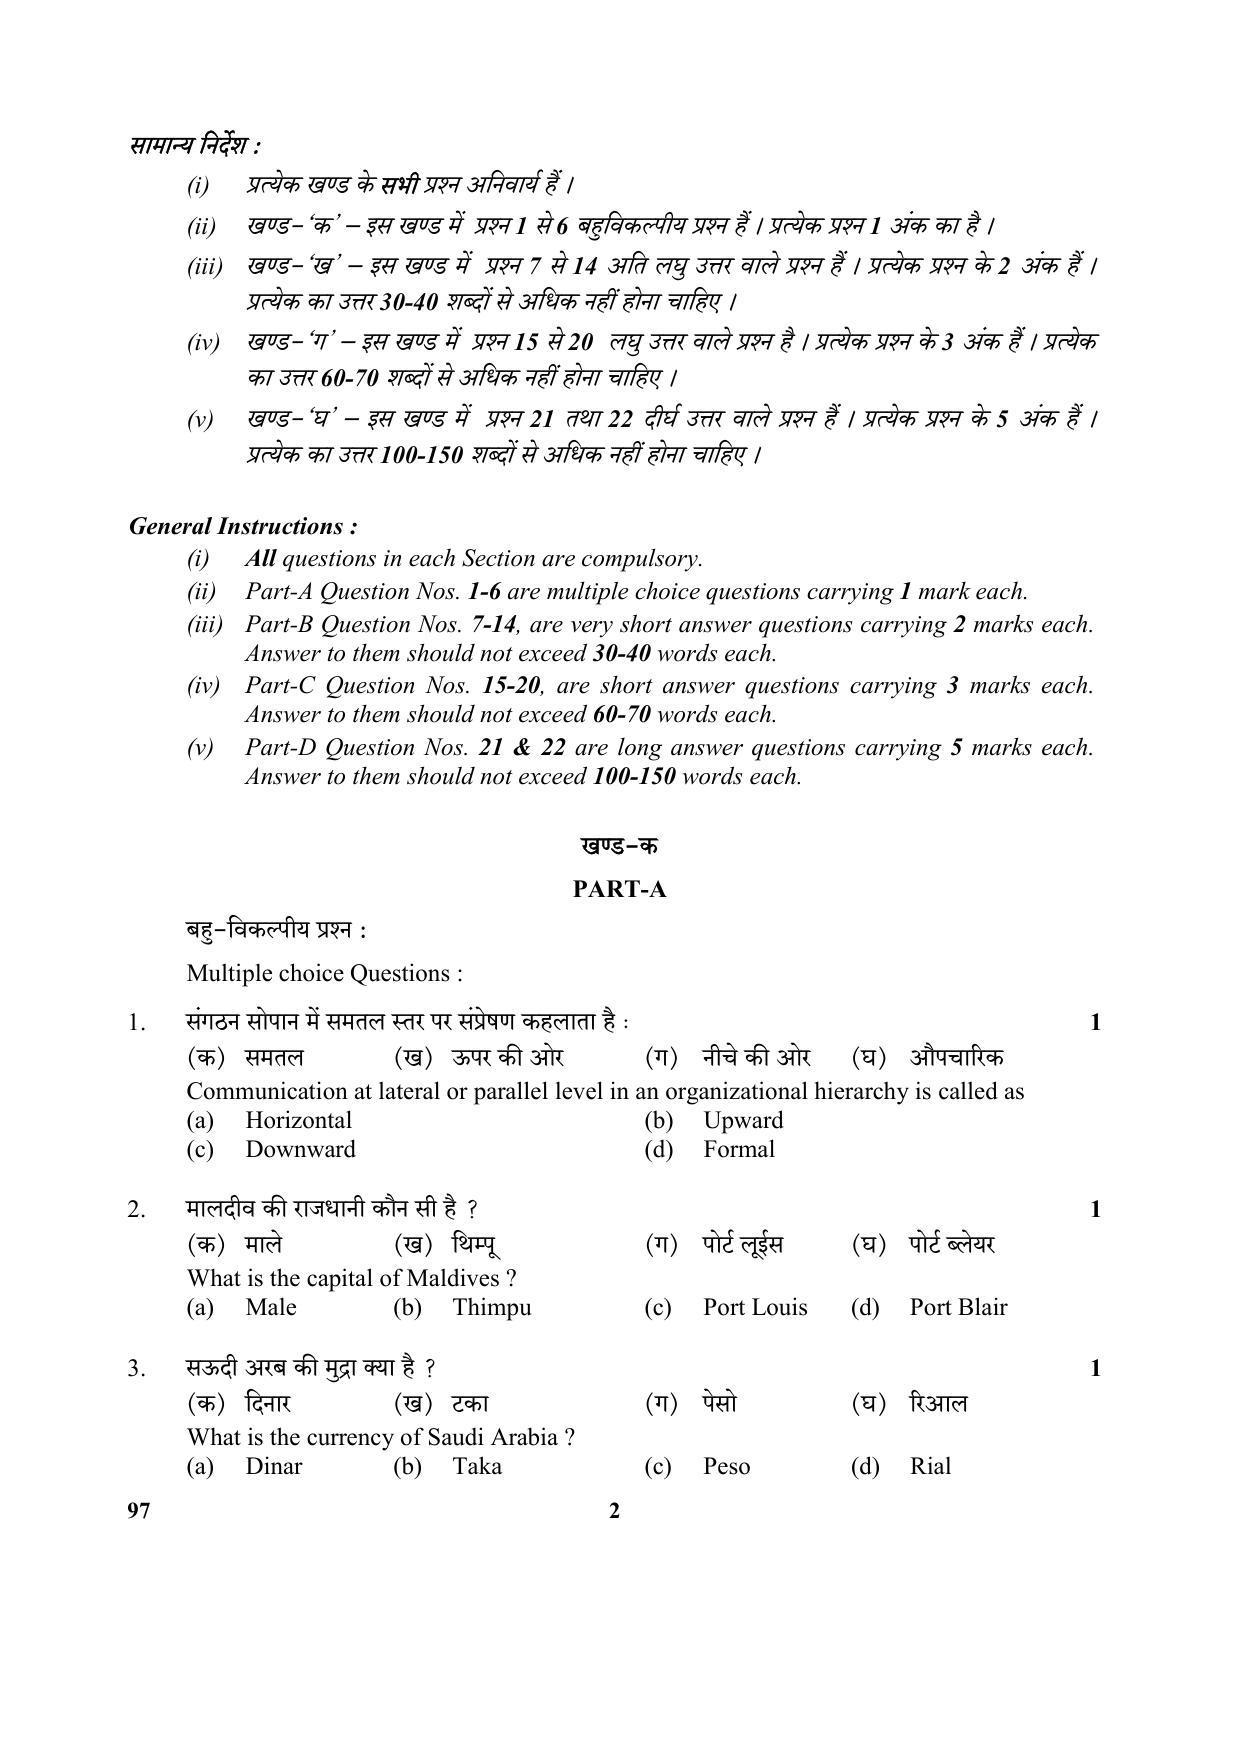 CBSE Class 10 97 (Front Office Operations) 2018 Question Paper - Page 2